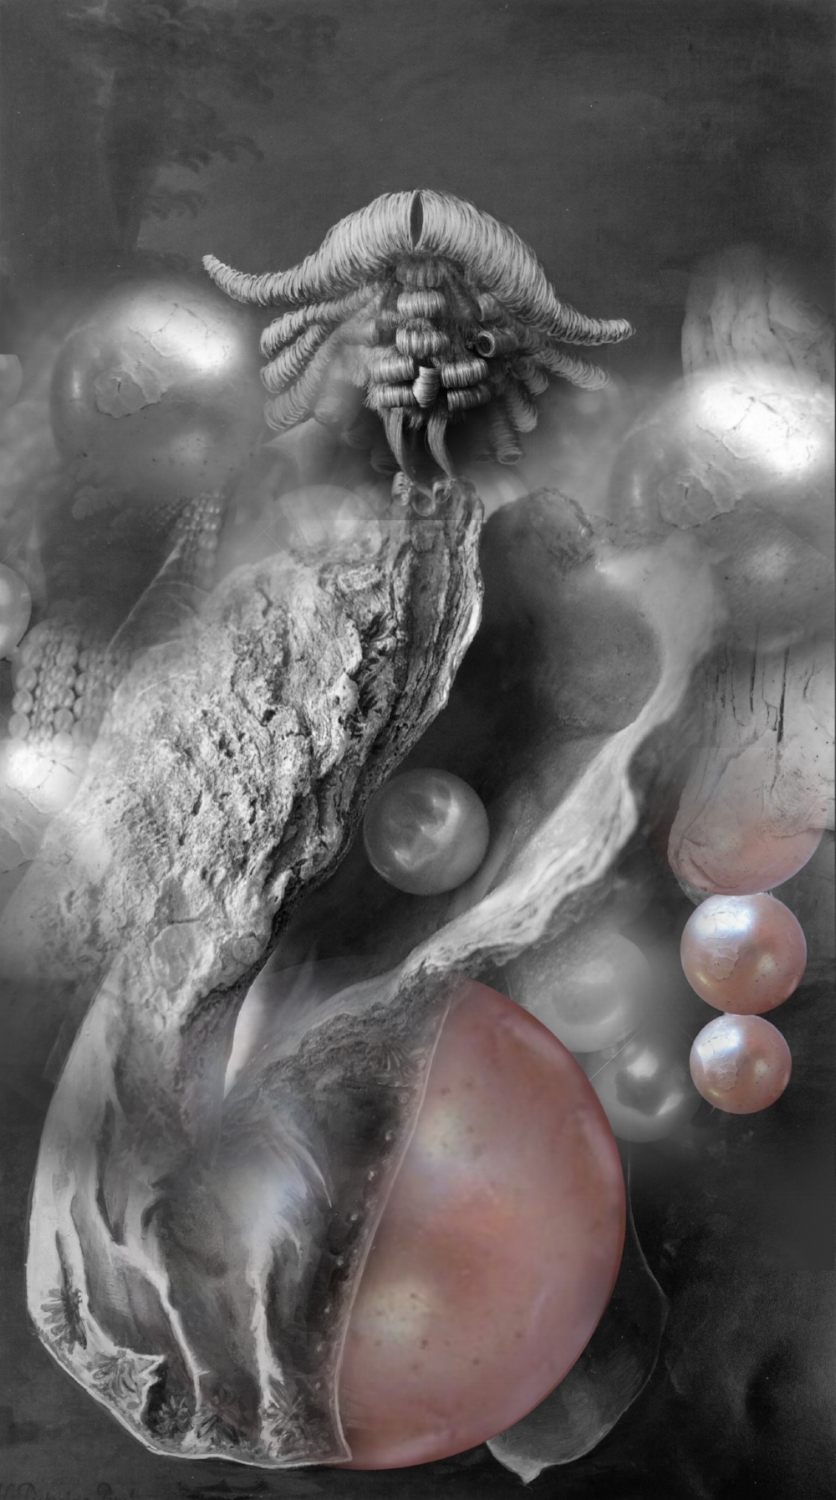   Wigs and Pearls , Digital Collage 